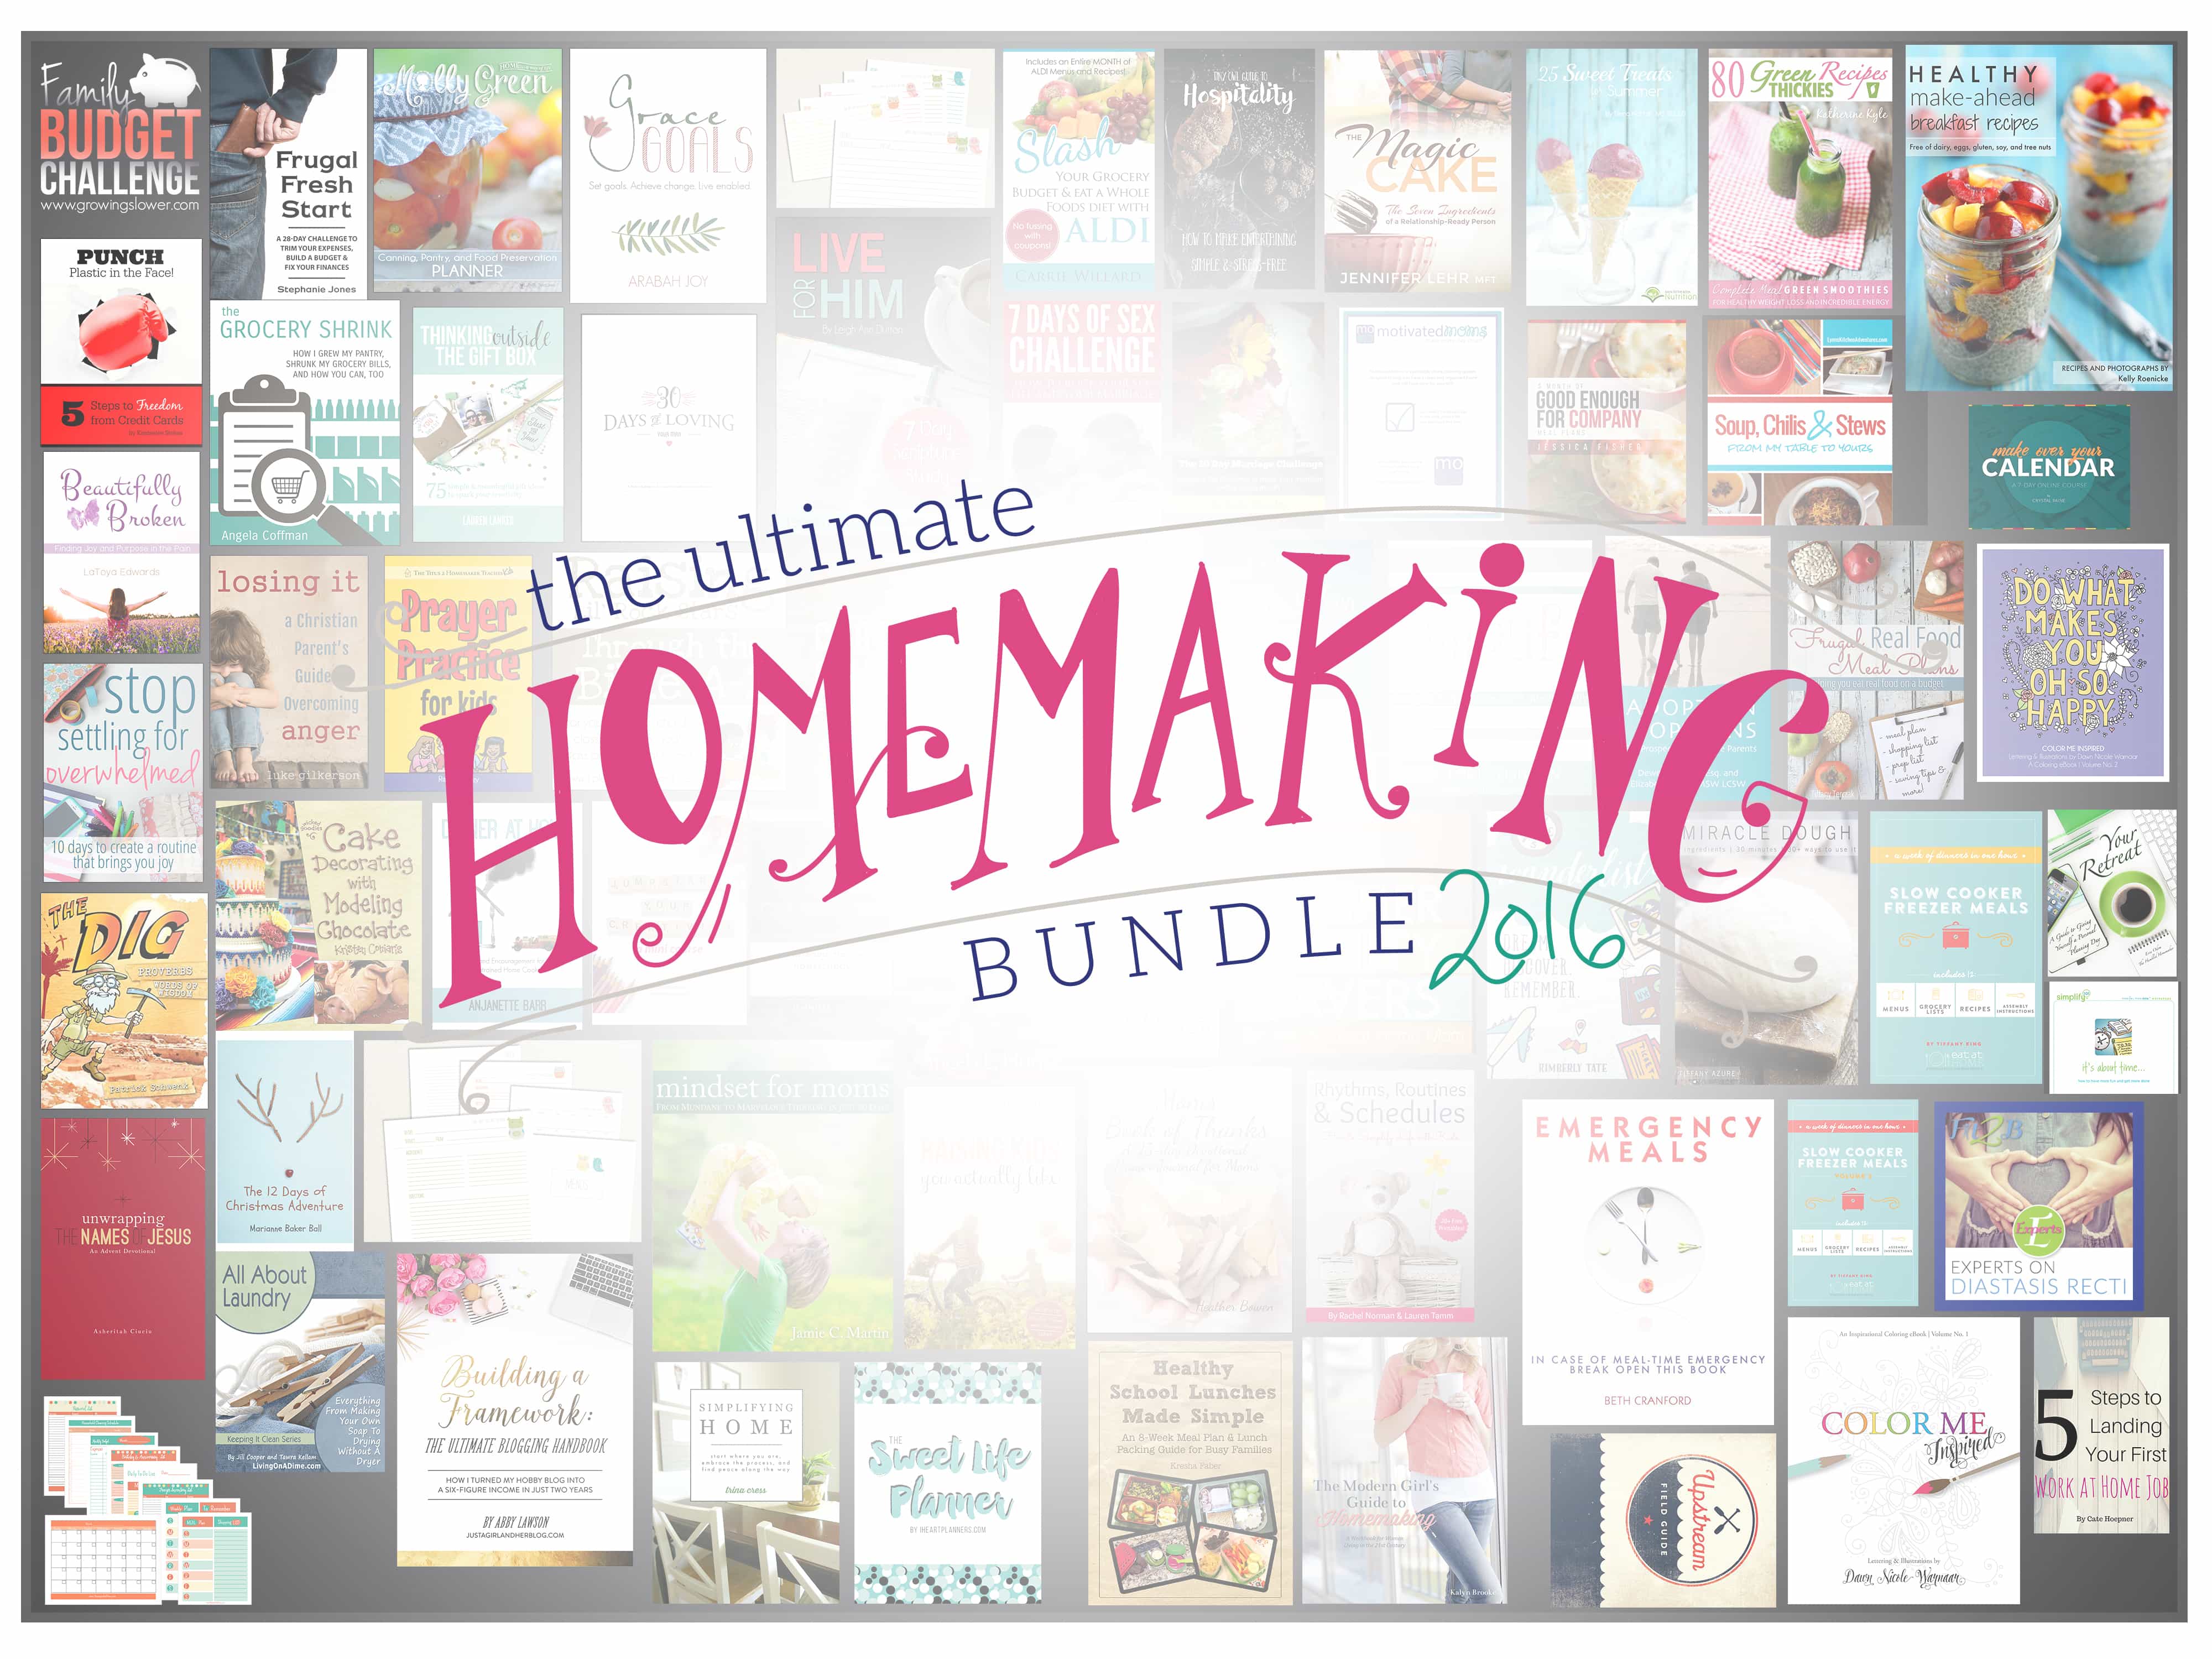 The Ultimate Homemaking Bundle was created to give you a lots of high-quality resources to take some of the stress out of homemaking and mothering.